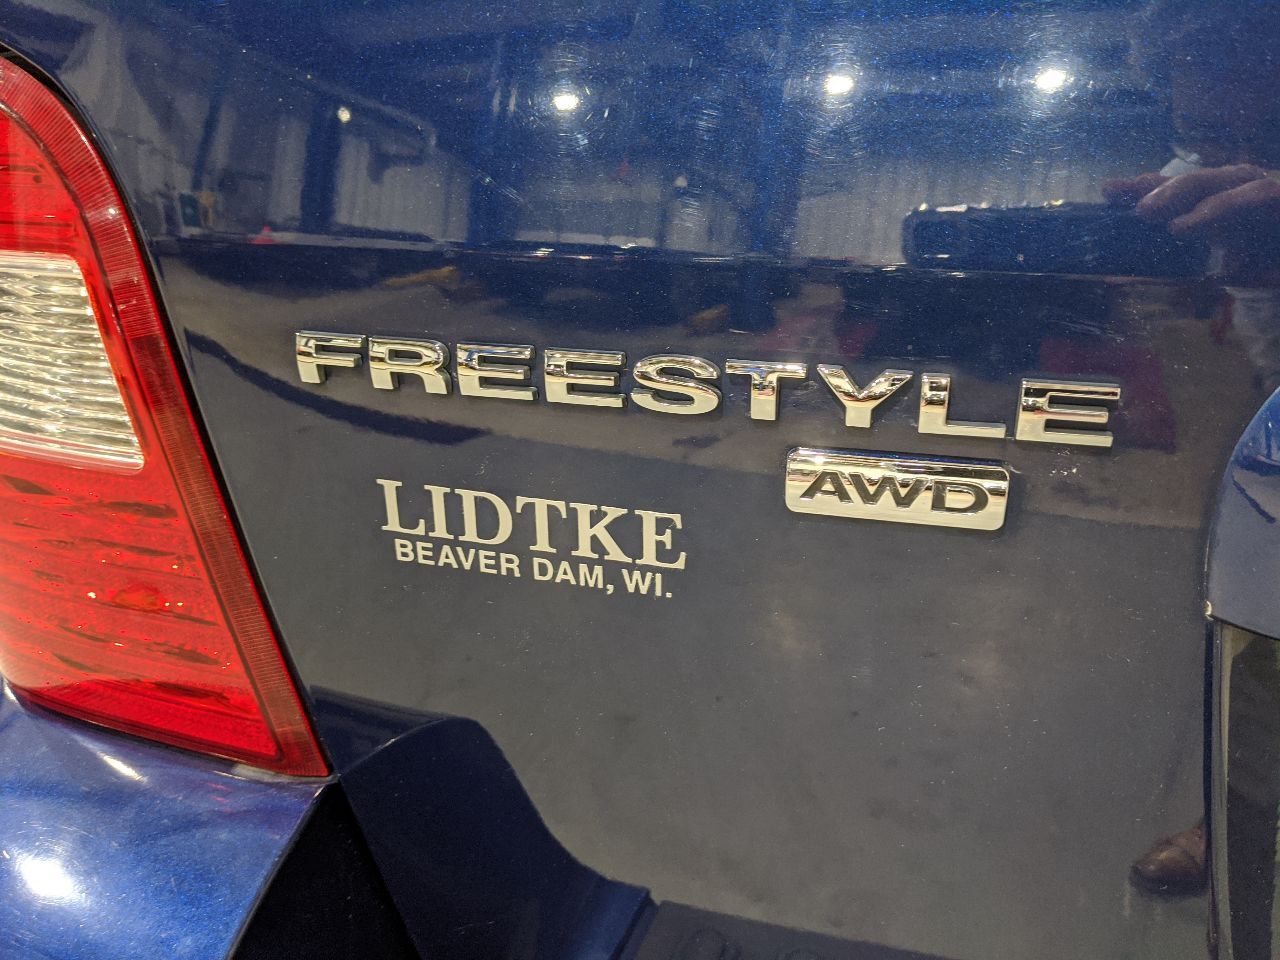 2005 Ford Freestyle